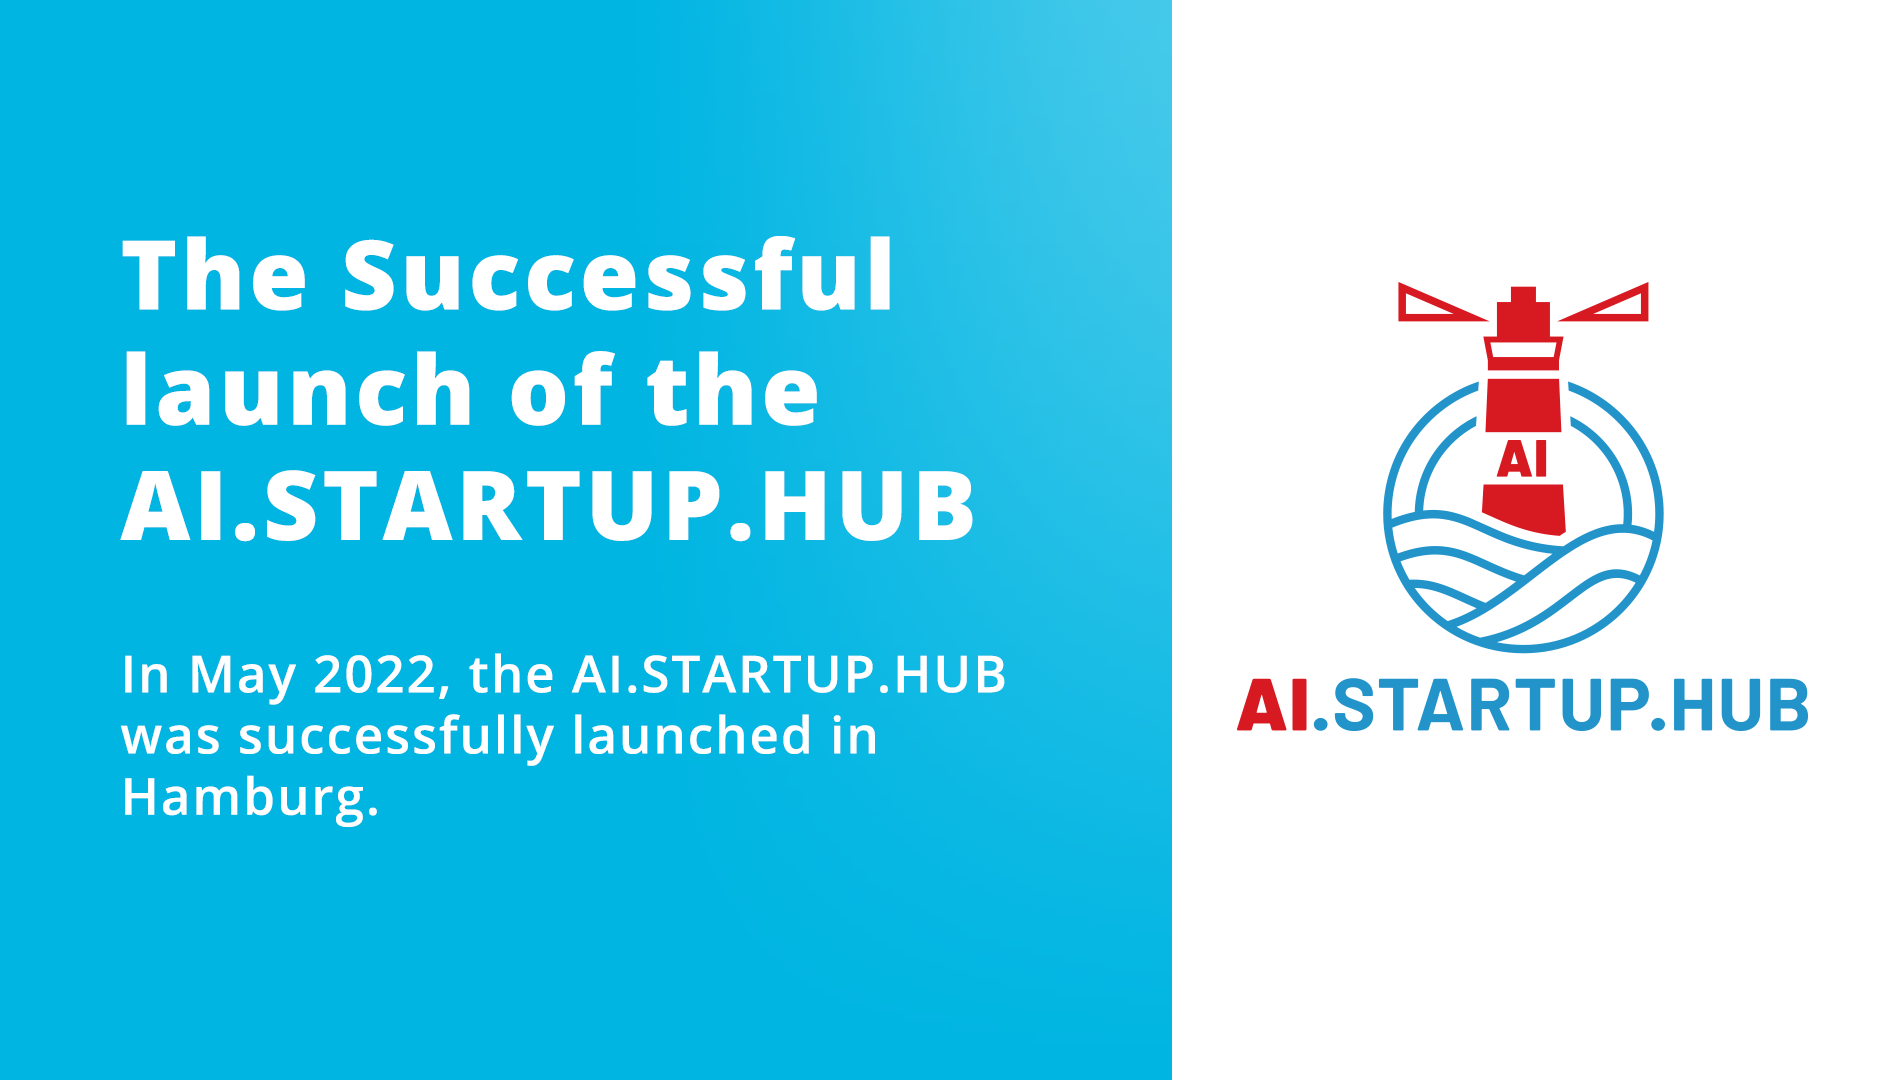 The Successful launch of the AI.STARTUP.HUB